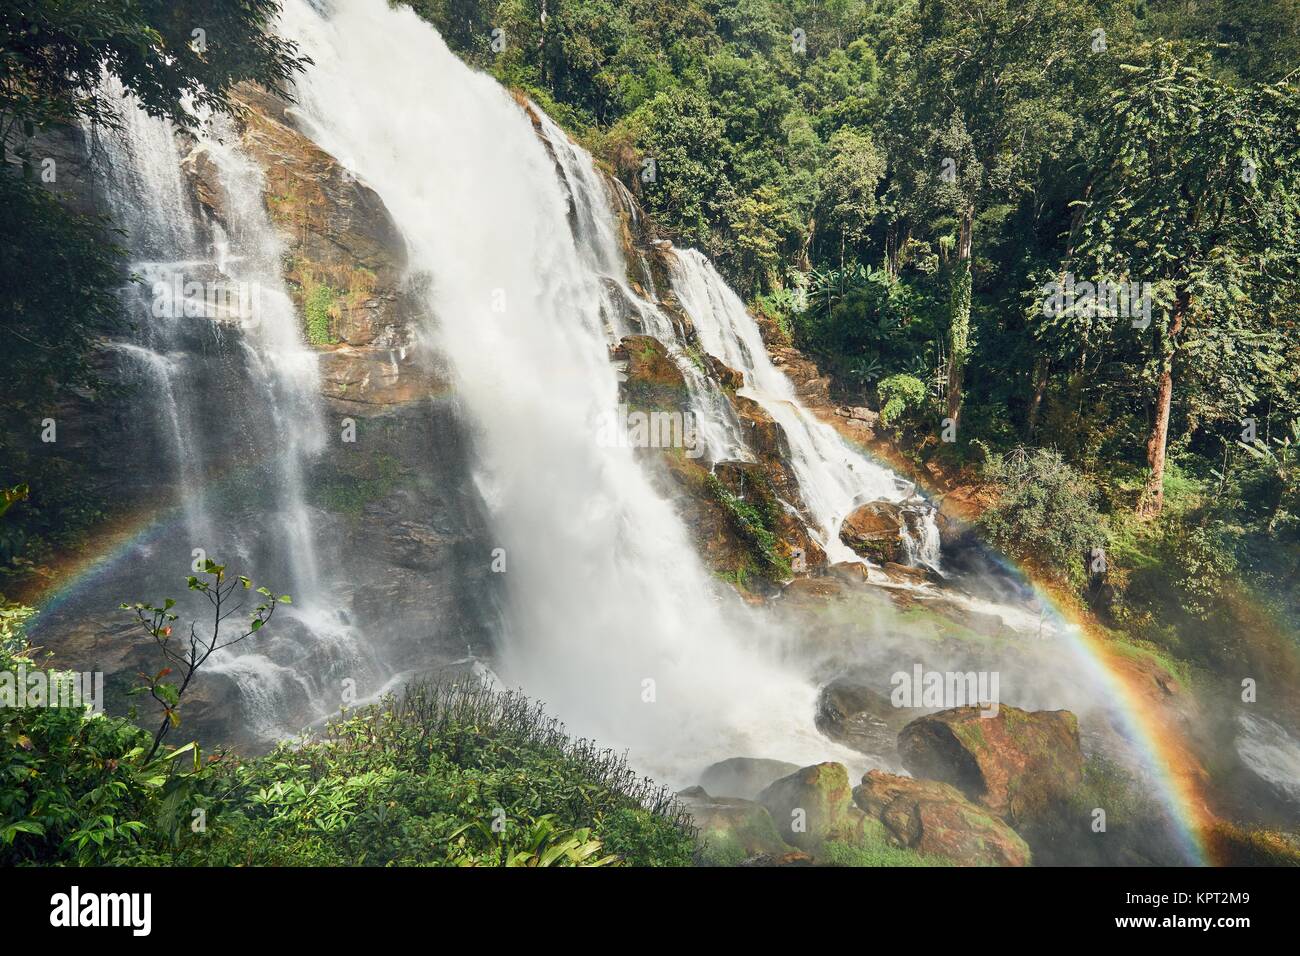 Amazing waterfall with rainbow in tropical rainforest near Chiang Mai, Thailand Stock Photo